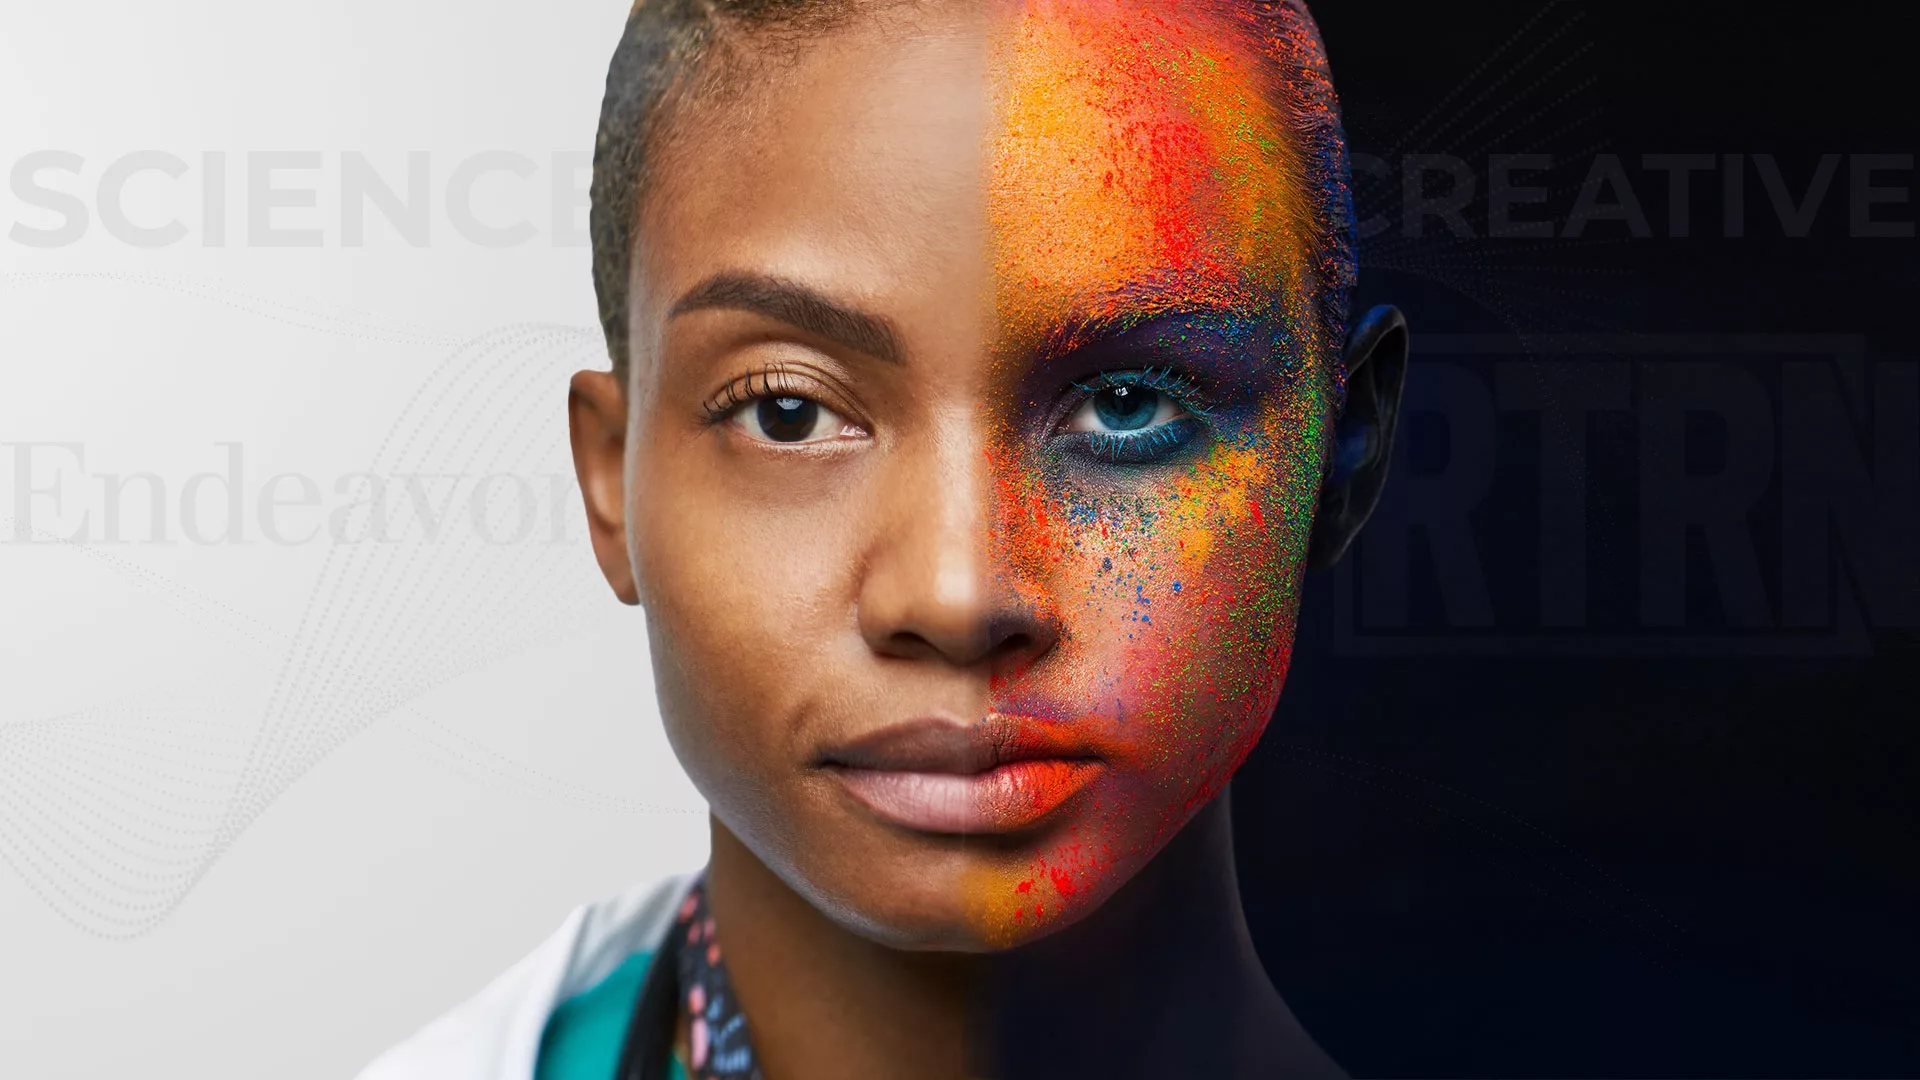 Marketing Strategy uses bright bold images like this one showing two half faces put together, one of a doctor, the other with paint splattered on her face